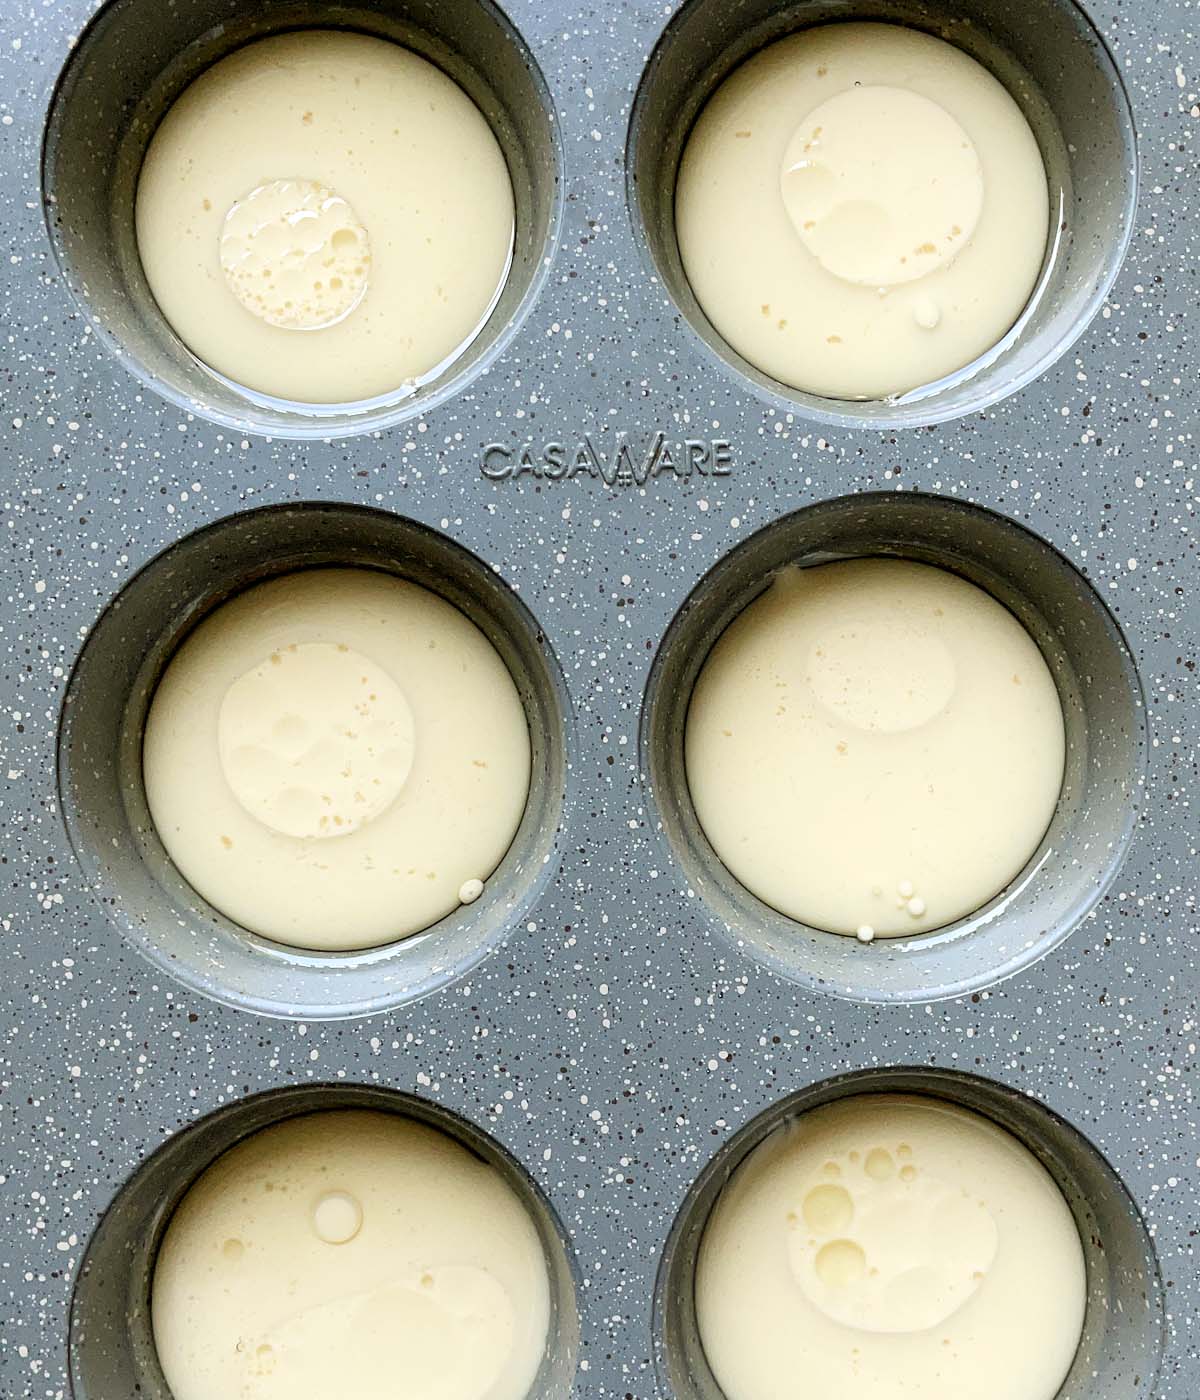 A grey speckled metal muffin tin containing light yellow batter in the cups.